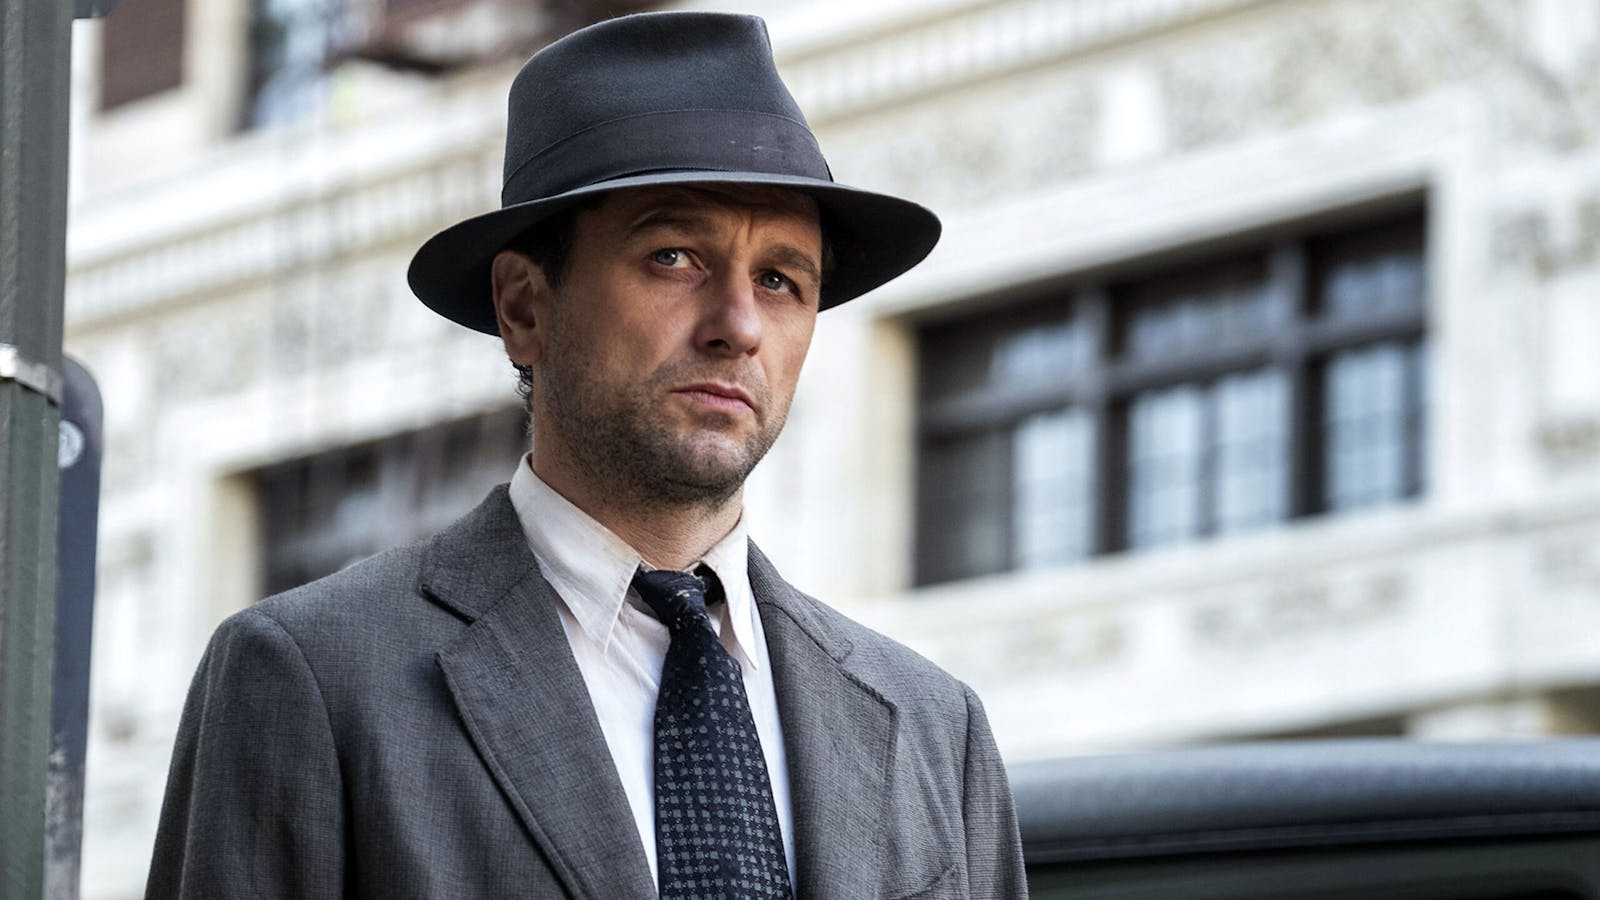 The actor Matthew Rhys, who plays the lead role in HBO's Perry Mason. Photo by HBO